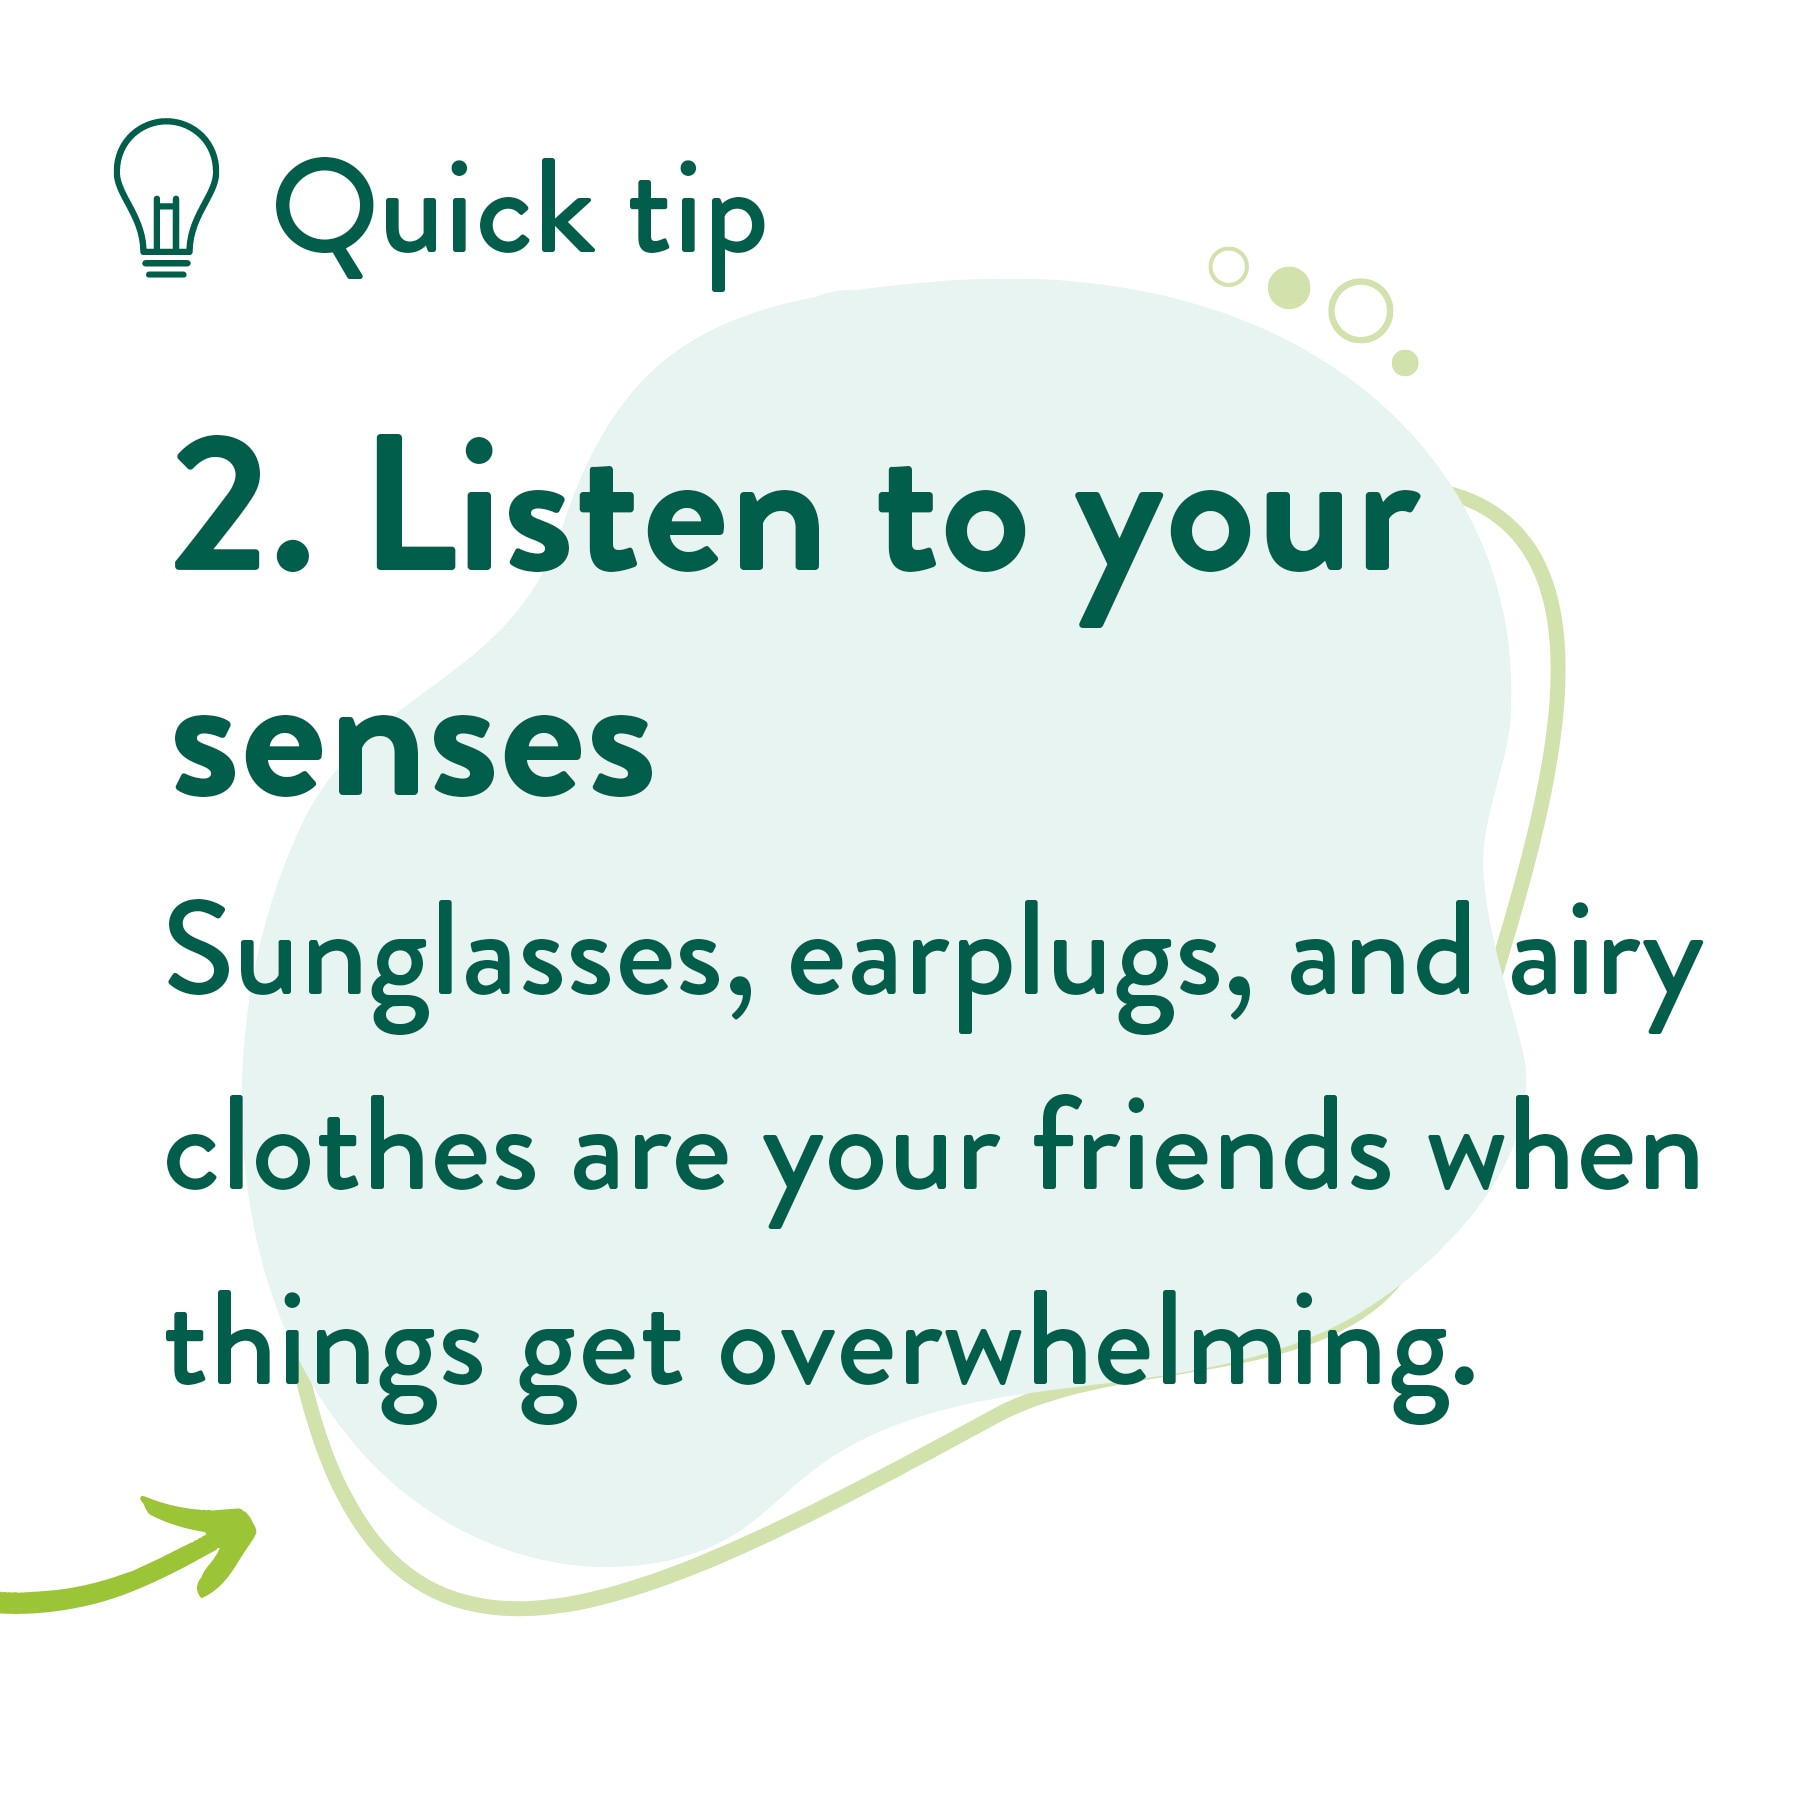 Sunglasses, earplugs, and airy clothes are your friends when things get overwhelming. 